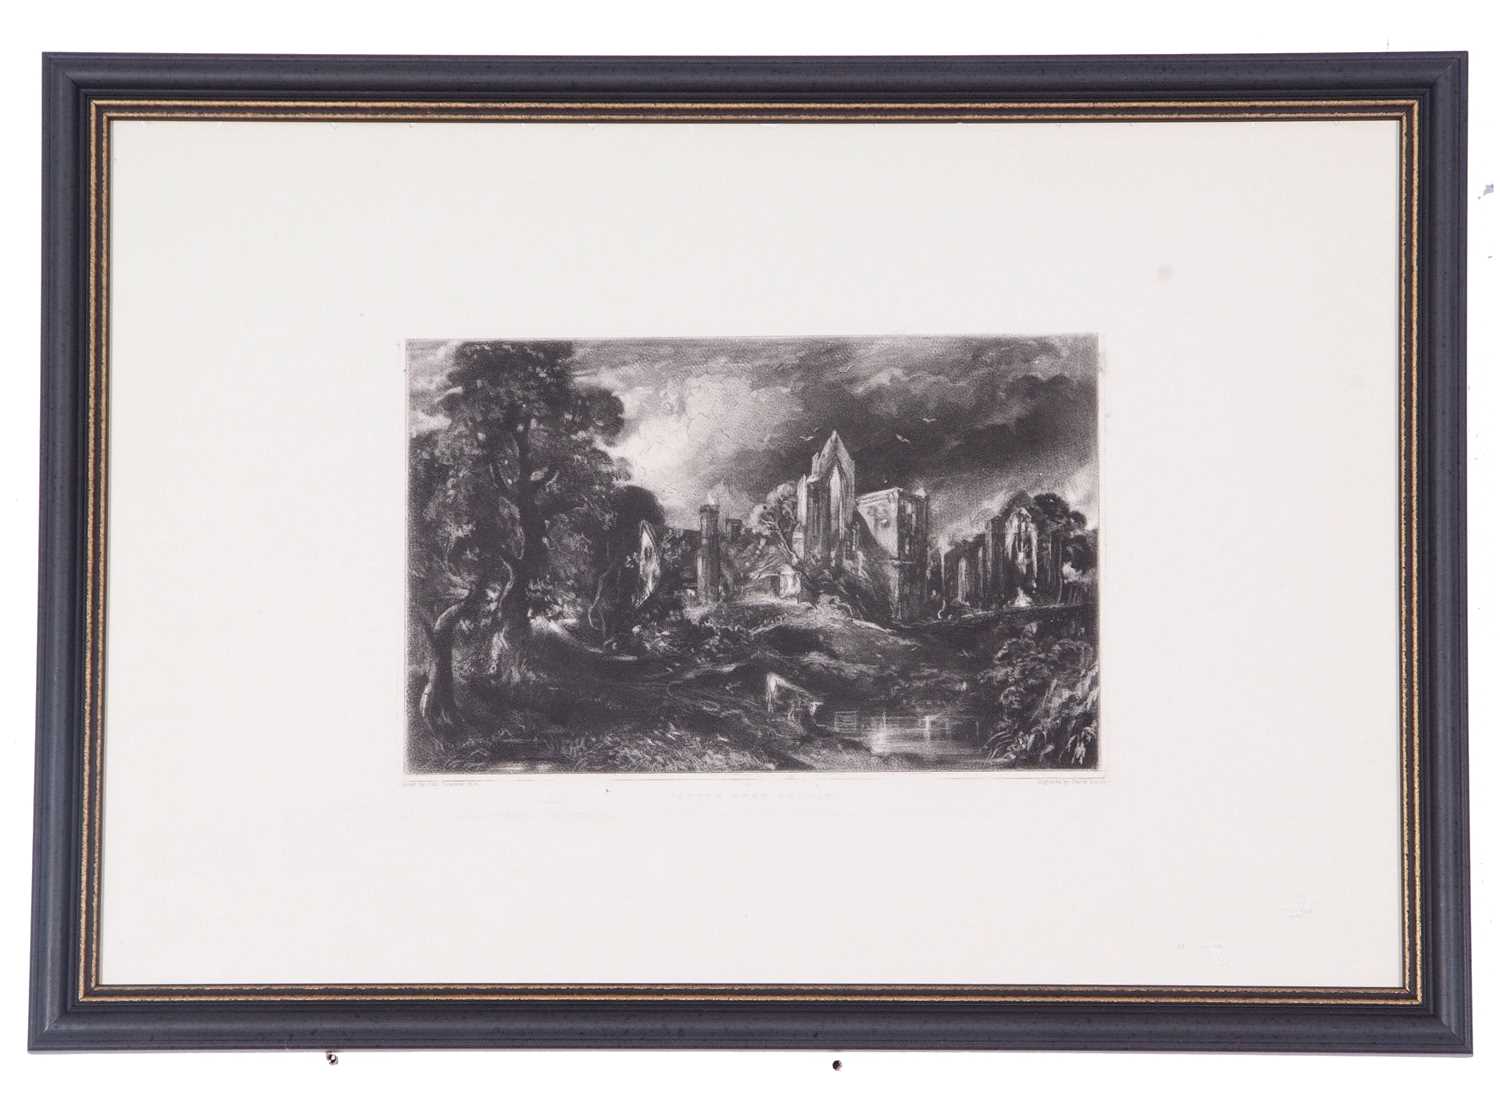 David Lucas (British, 1802-1881) after John Constable (British, 1776-1837), Castle Acre Priory, - Image 2 of 2